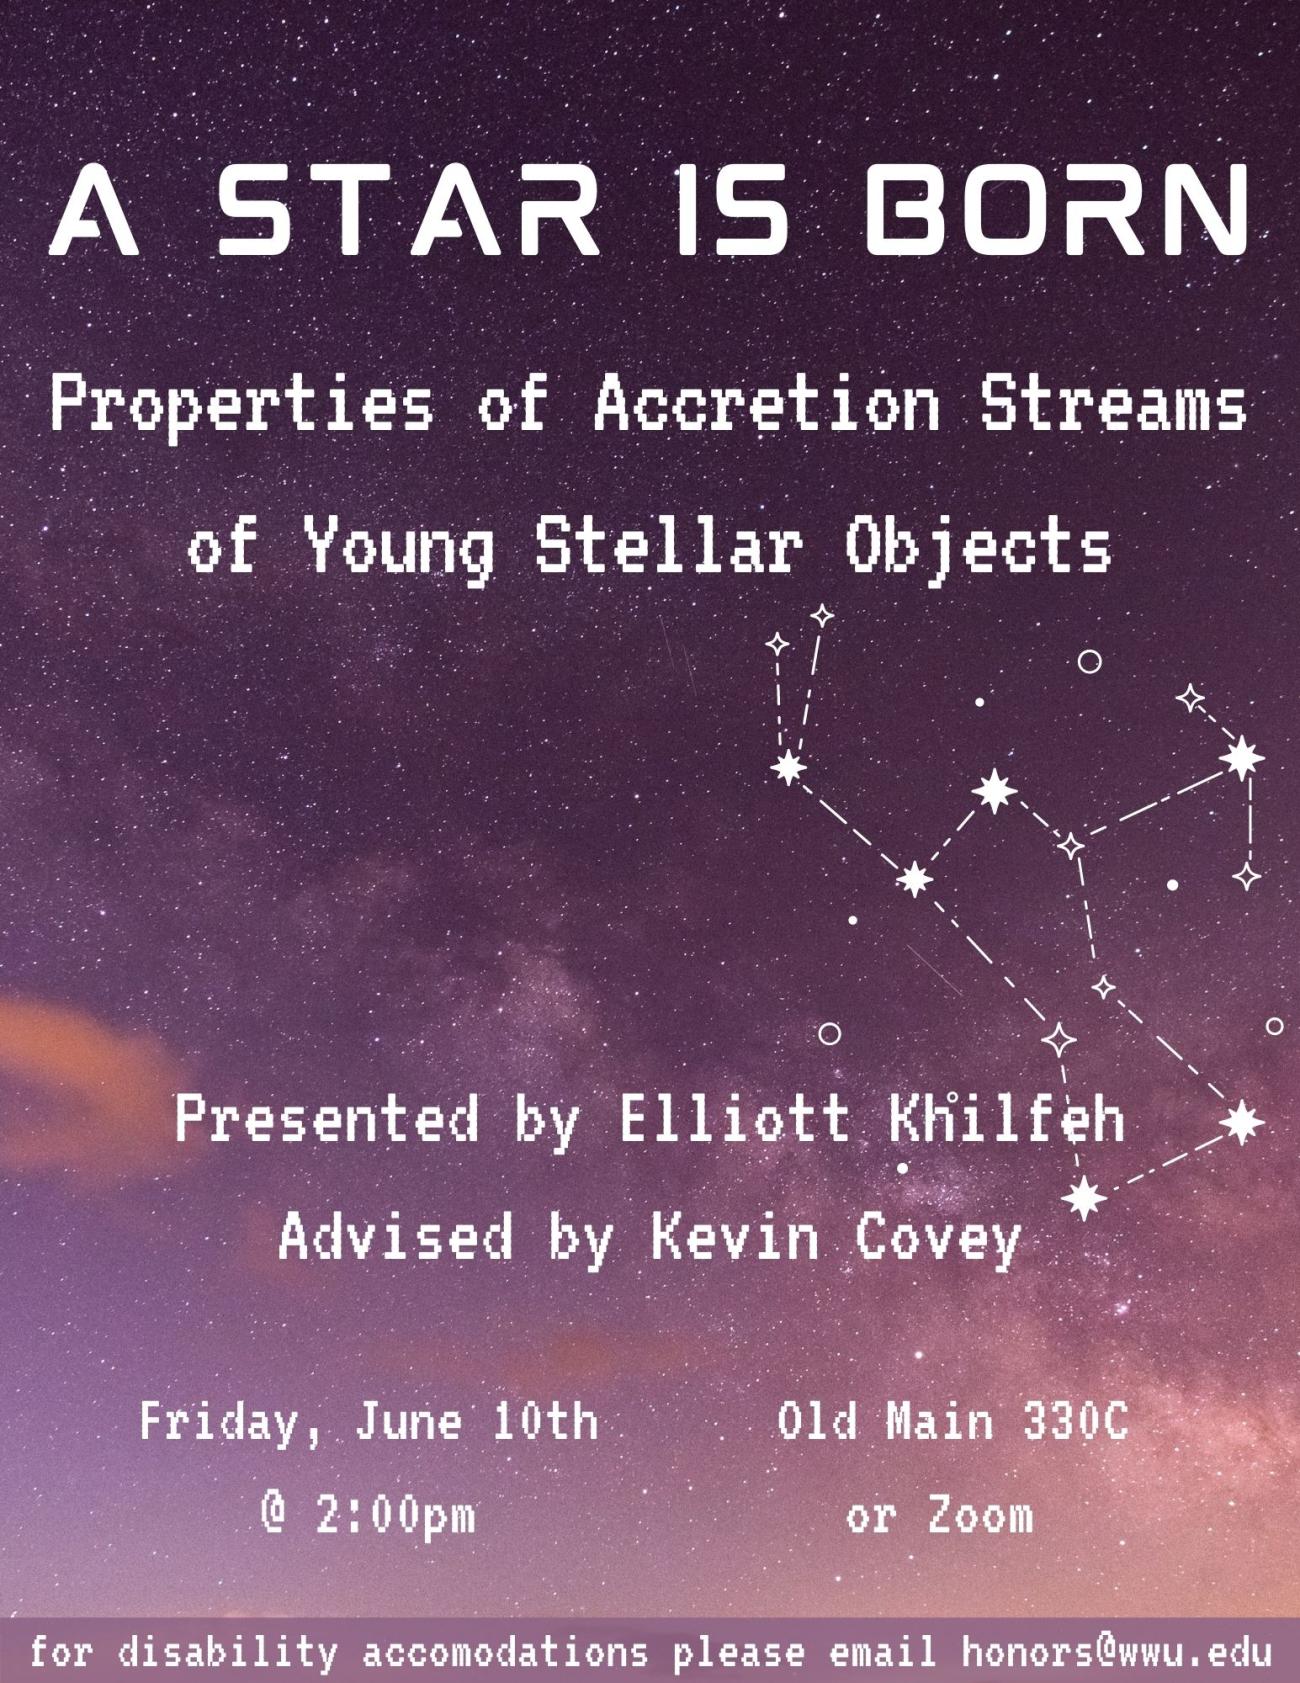 Gradient dark-to-light photo of a purple starry sky background and a white drawing of the constellation of Orion with text that reads “A Star is Born: Properties of Accretion Streams of Young Stellar Objects. Presented by Elliott Khilfeh. Advised by Kevin Covey. Friday, June 10th at 2:00pm. Old Main 330C or Zoom. For disability accommodations please email honors@wwu.edu.” 